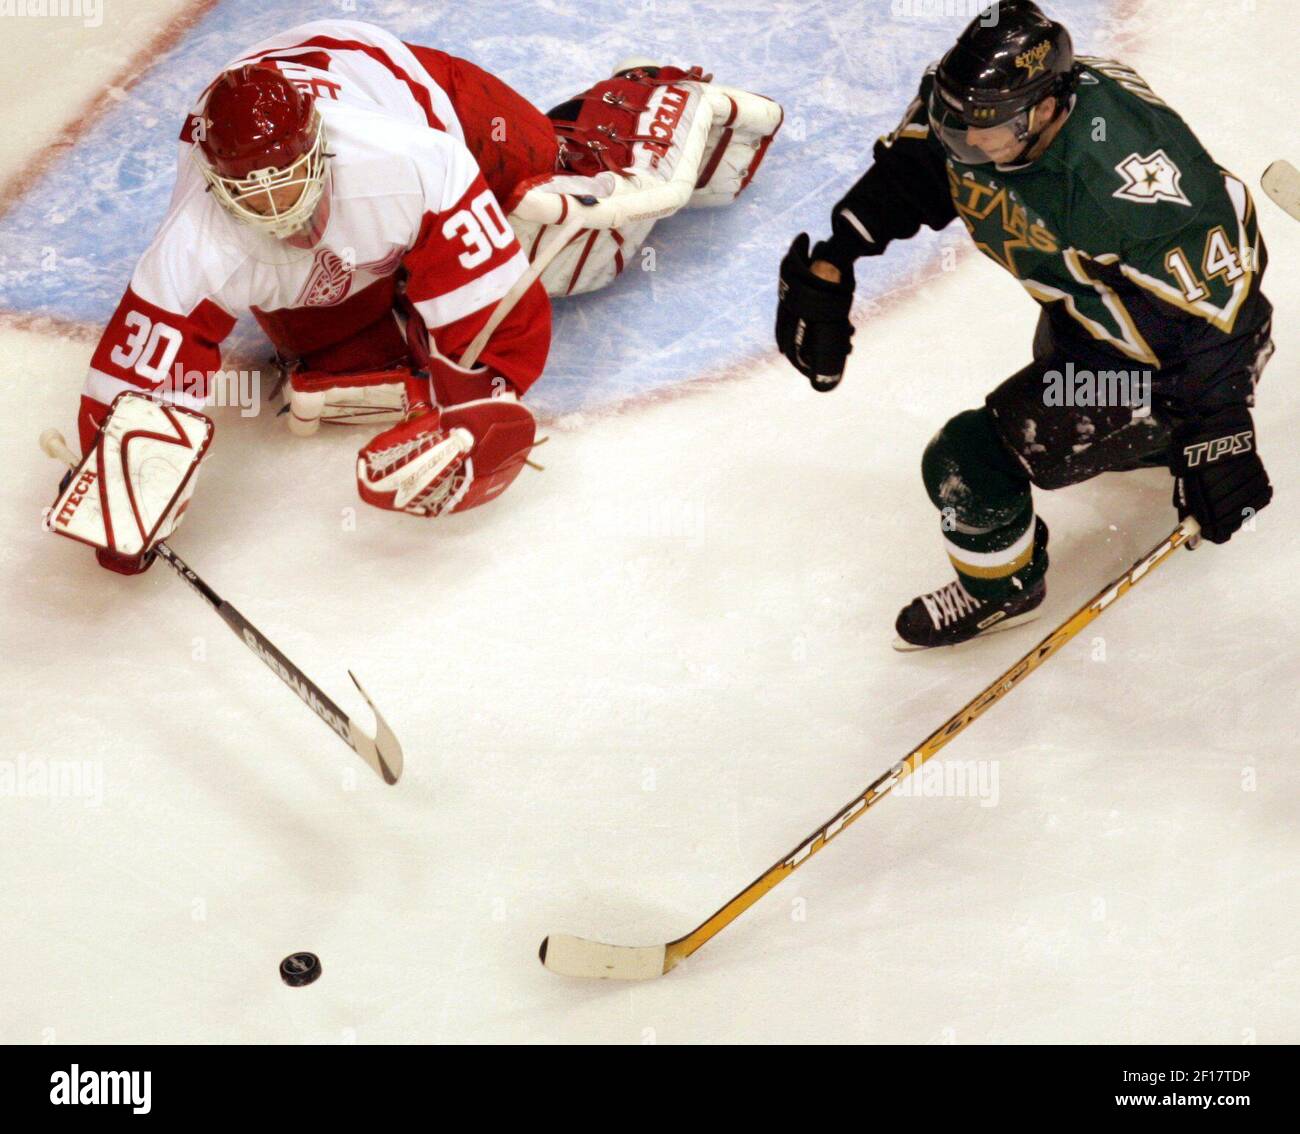 Detroit Red Wings goalie Chris Osgood, left, stops a Los Angeles Kings  Justin Williams (14) shot as Red Wings defenseman Brad Stuart (23) looks on  in the second period of an NHL